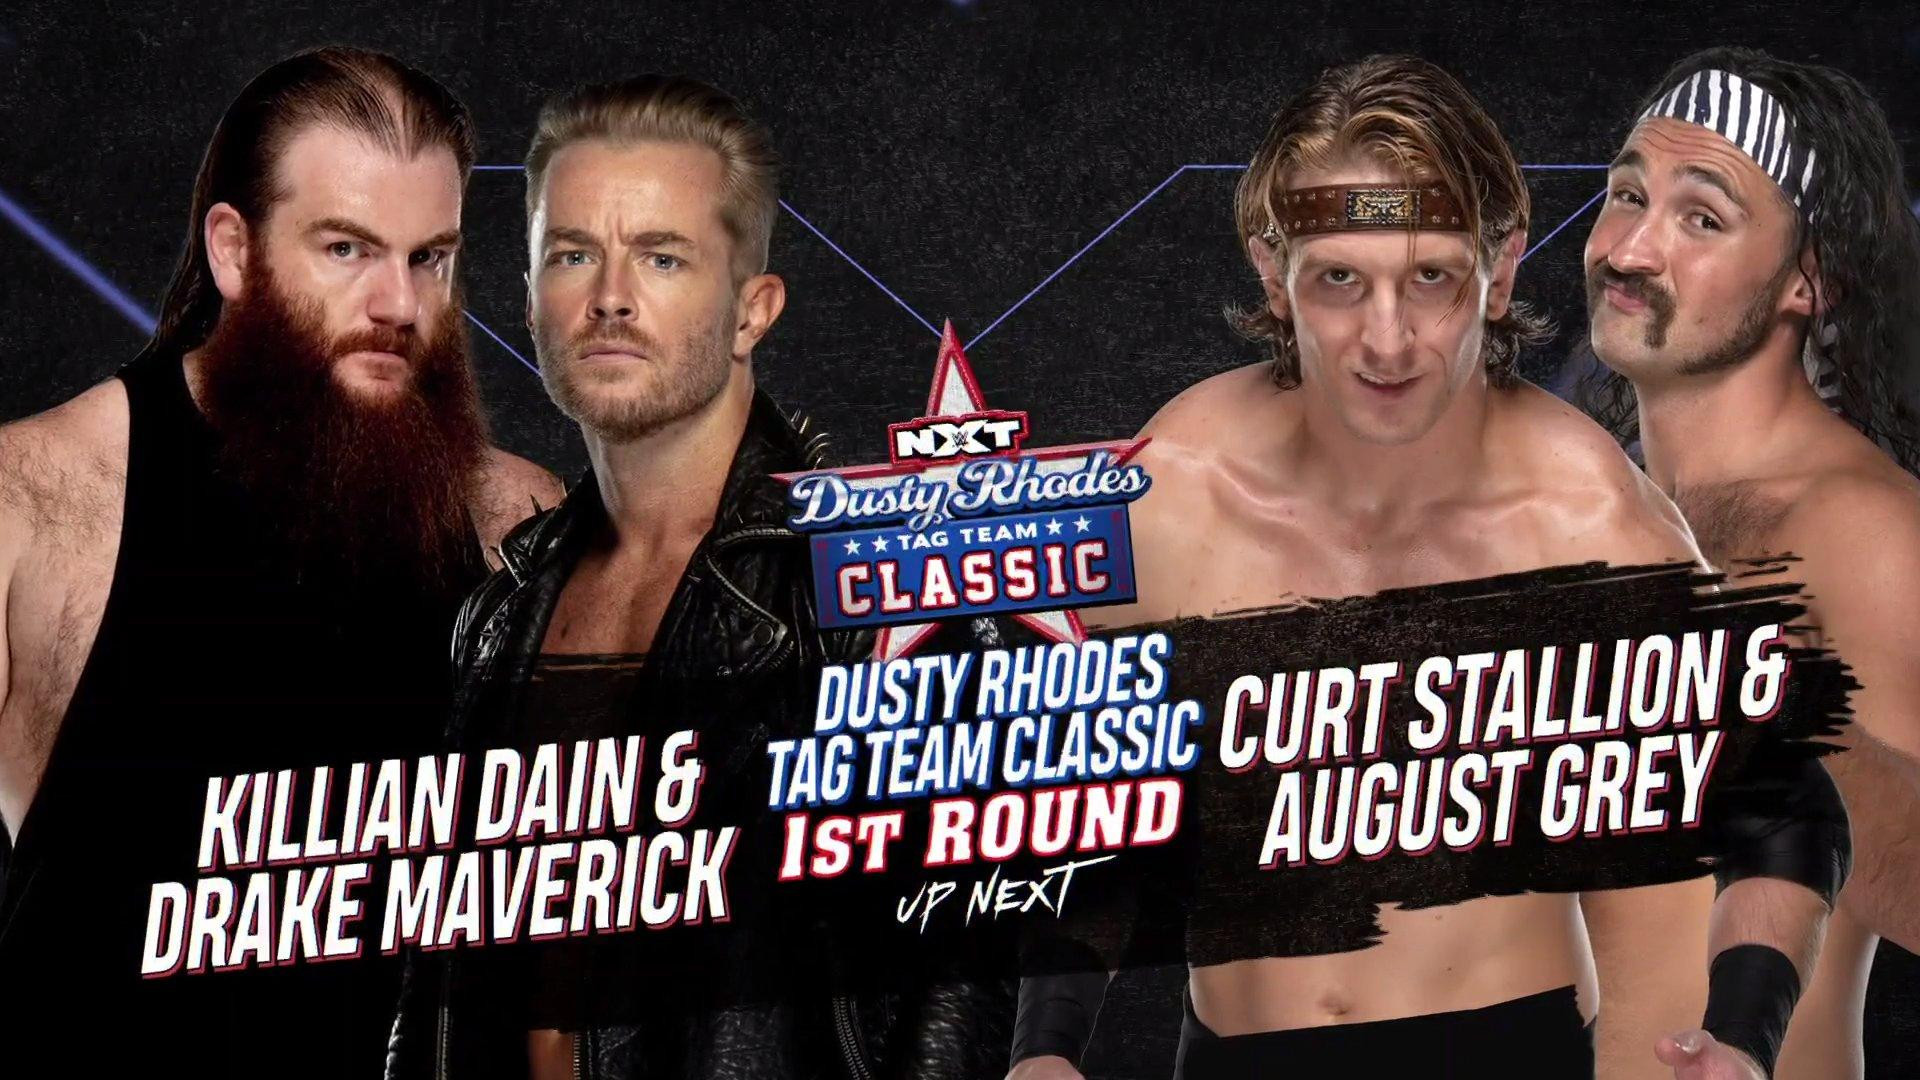 Two More Teams Advance In NXT Men's Dusty Rhodes Tag Team Classic